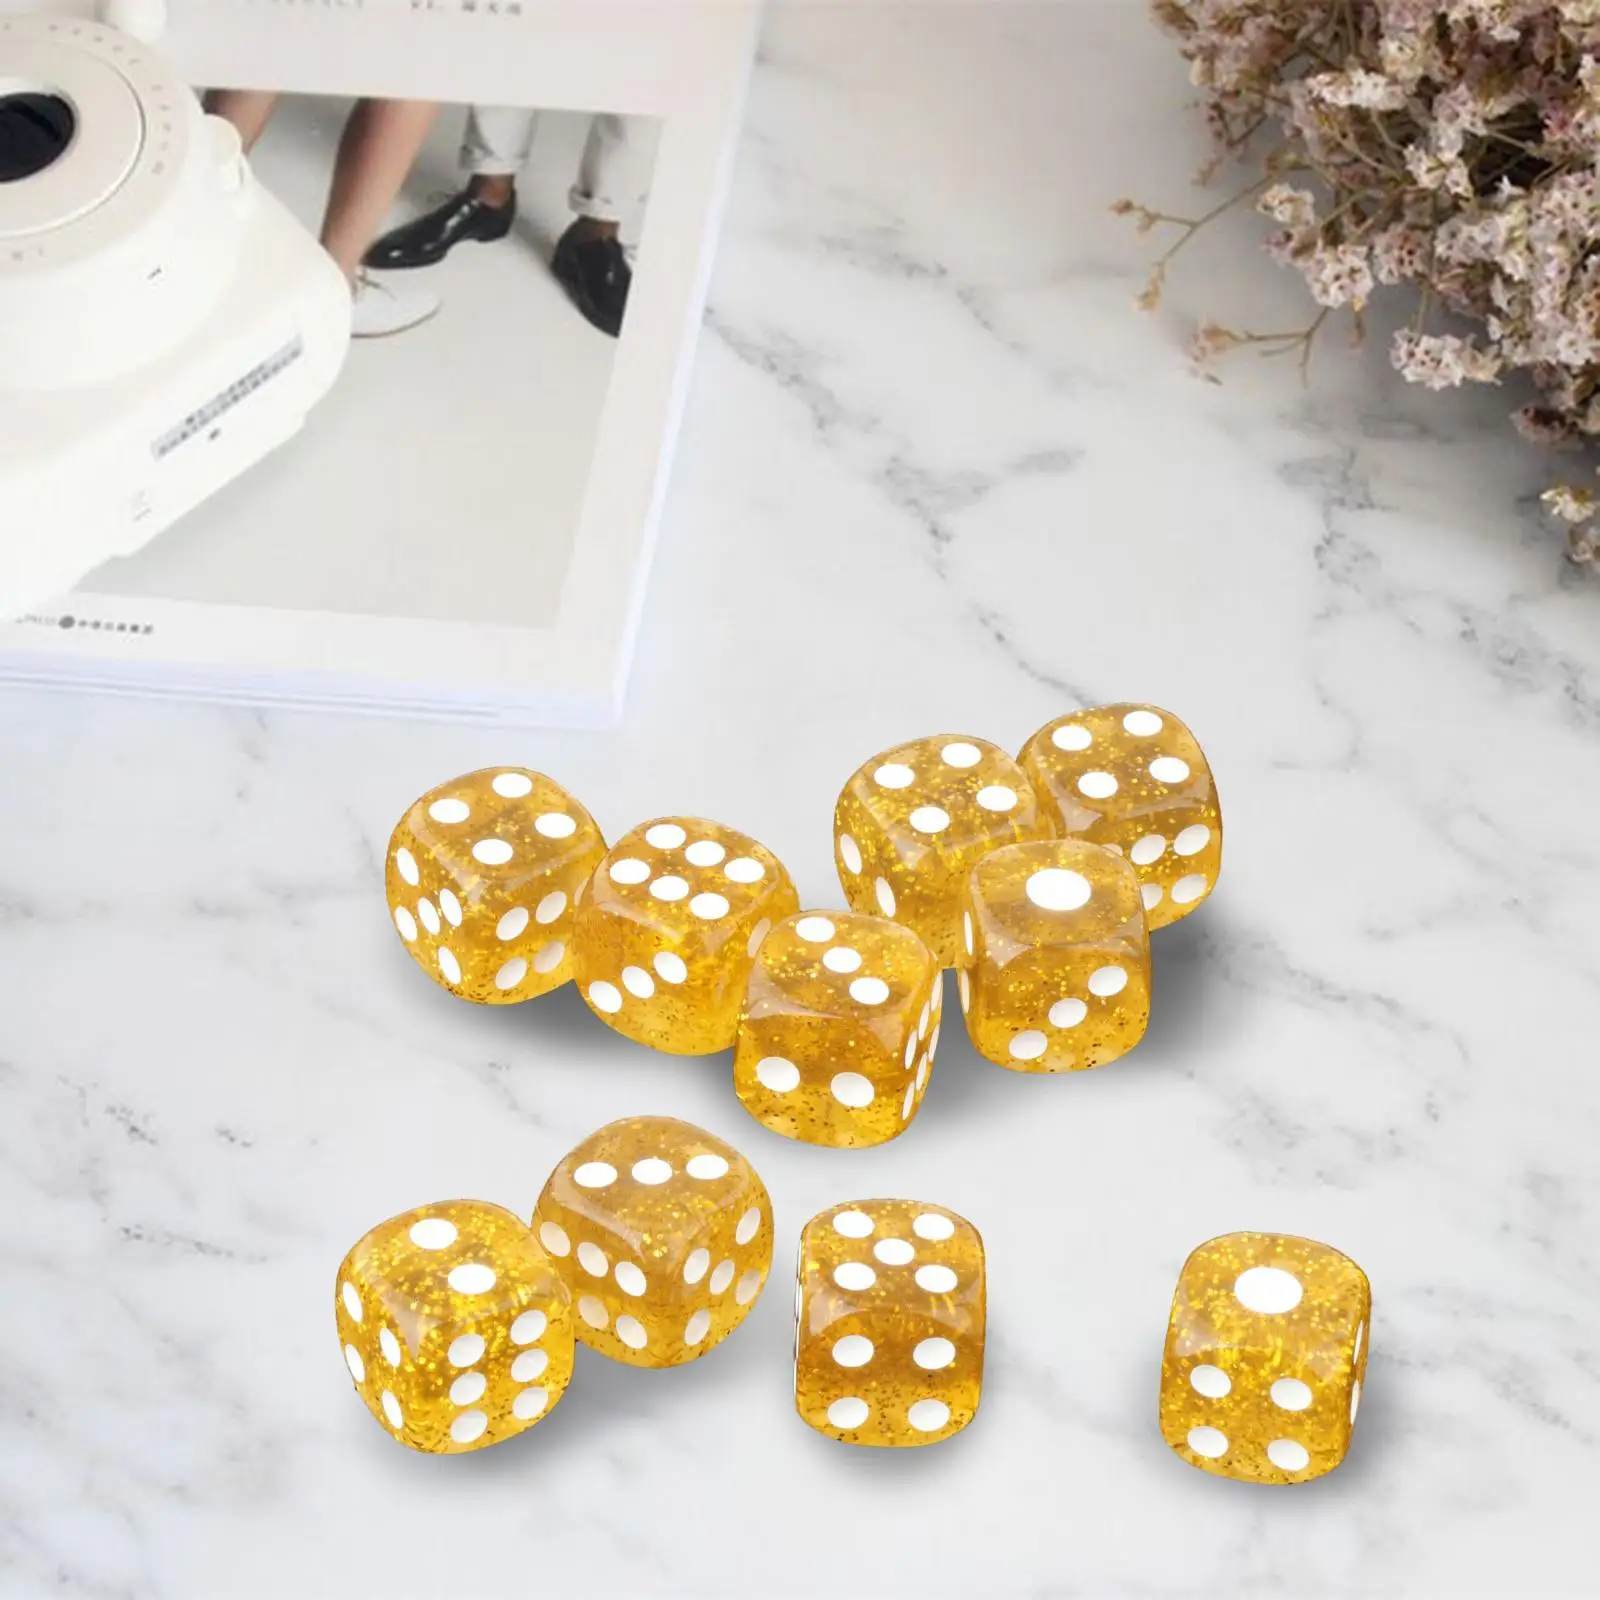 10 Pieces 6 Sided Acrylic Dices Dice Game Spot Dice for Party Table Board 